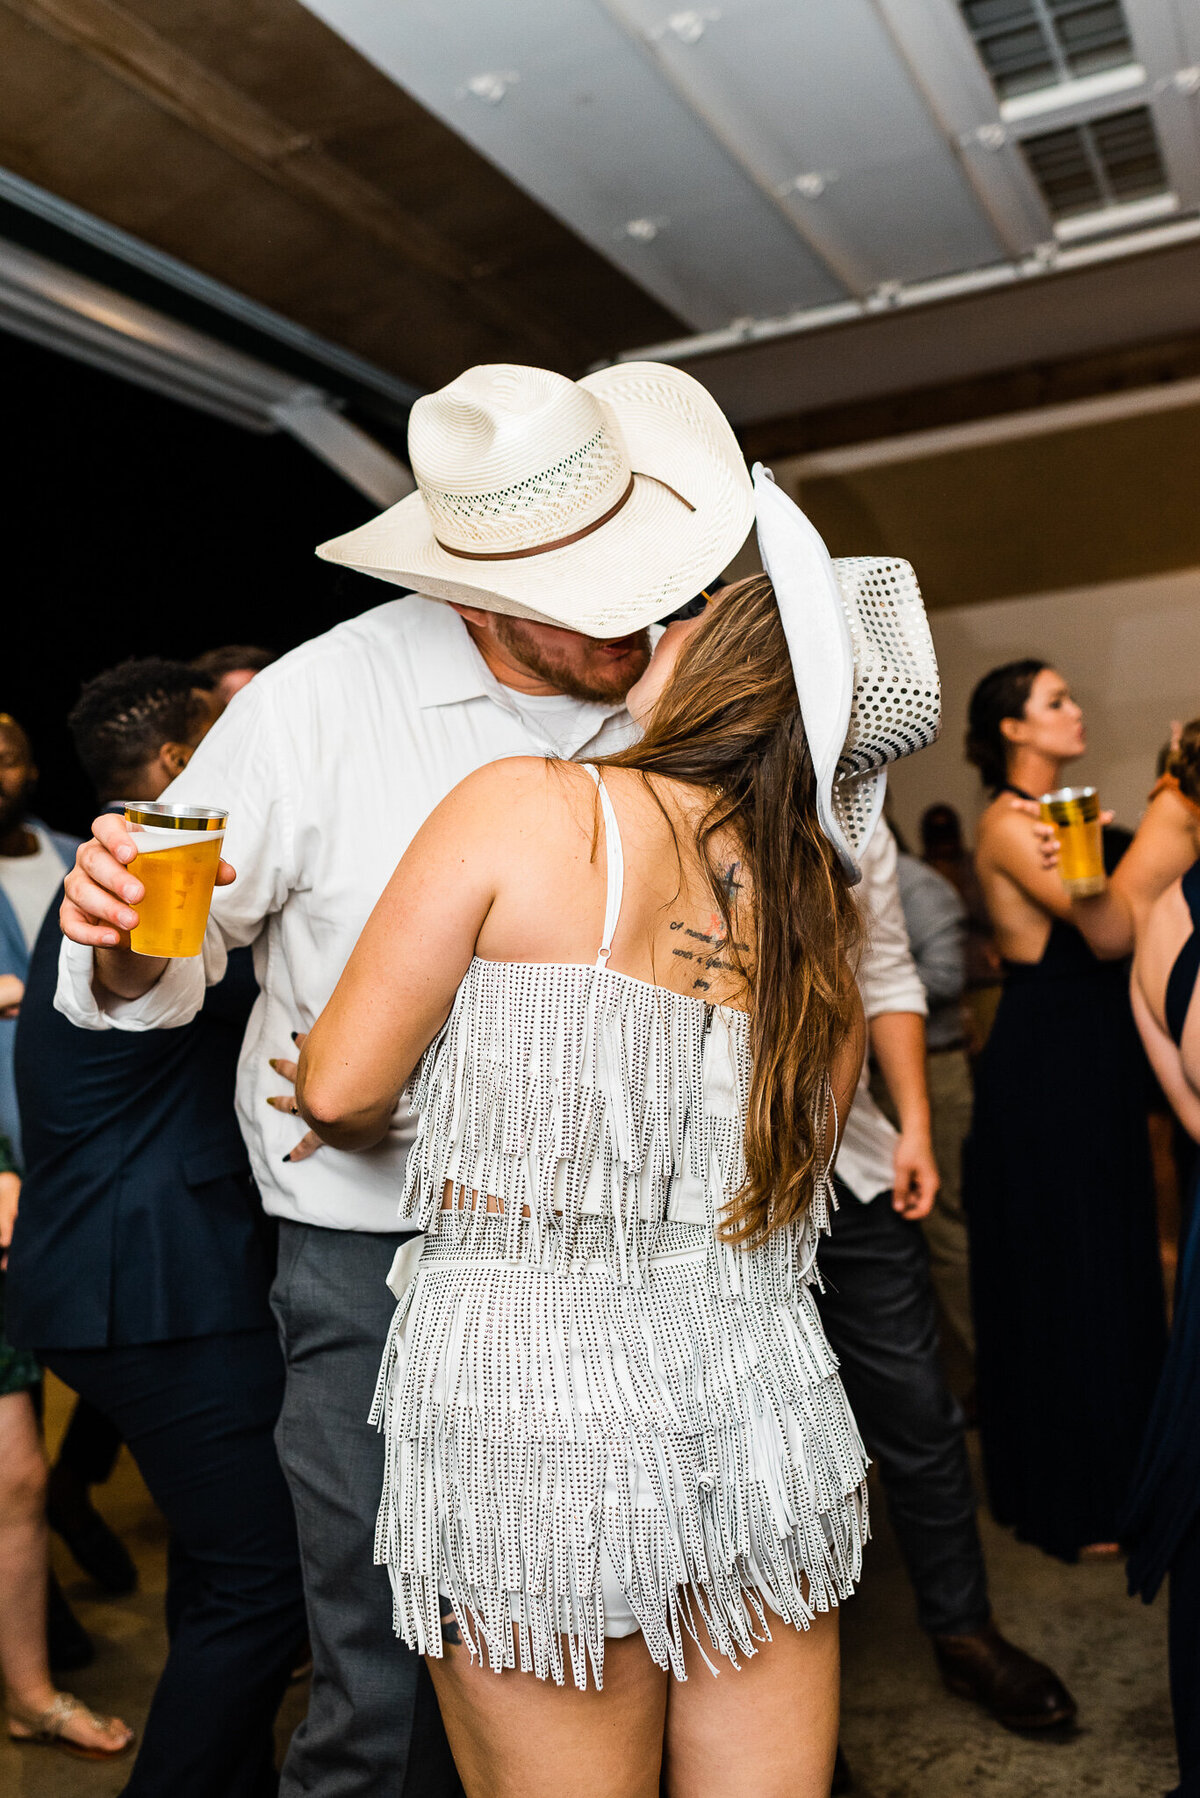 Virginia wedding photographer captures bride and groom both in cowboy hats kissing on the dance floor during their wedding reception